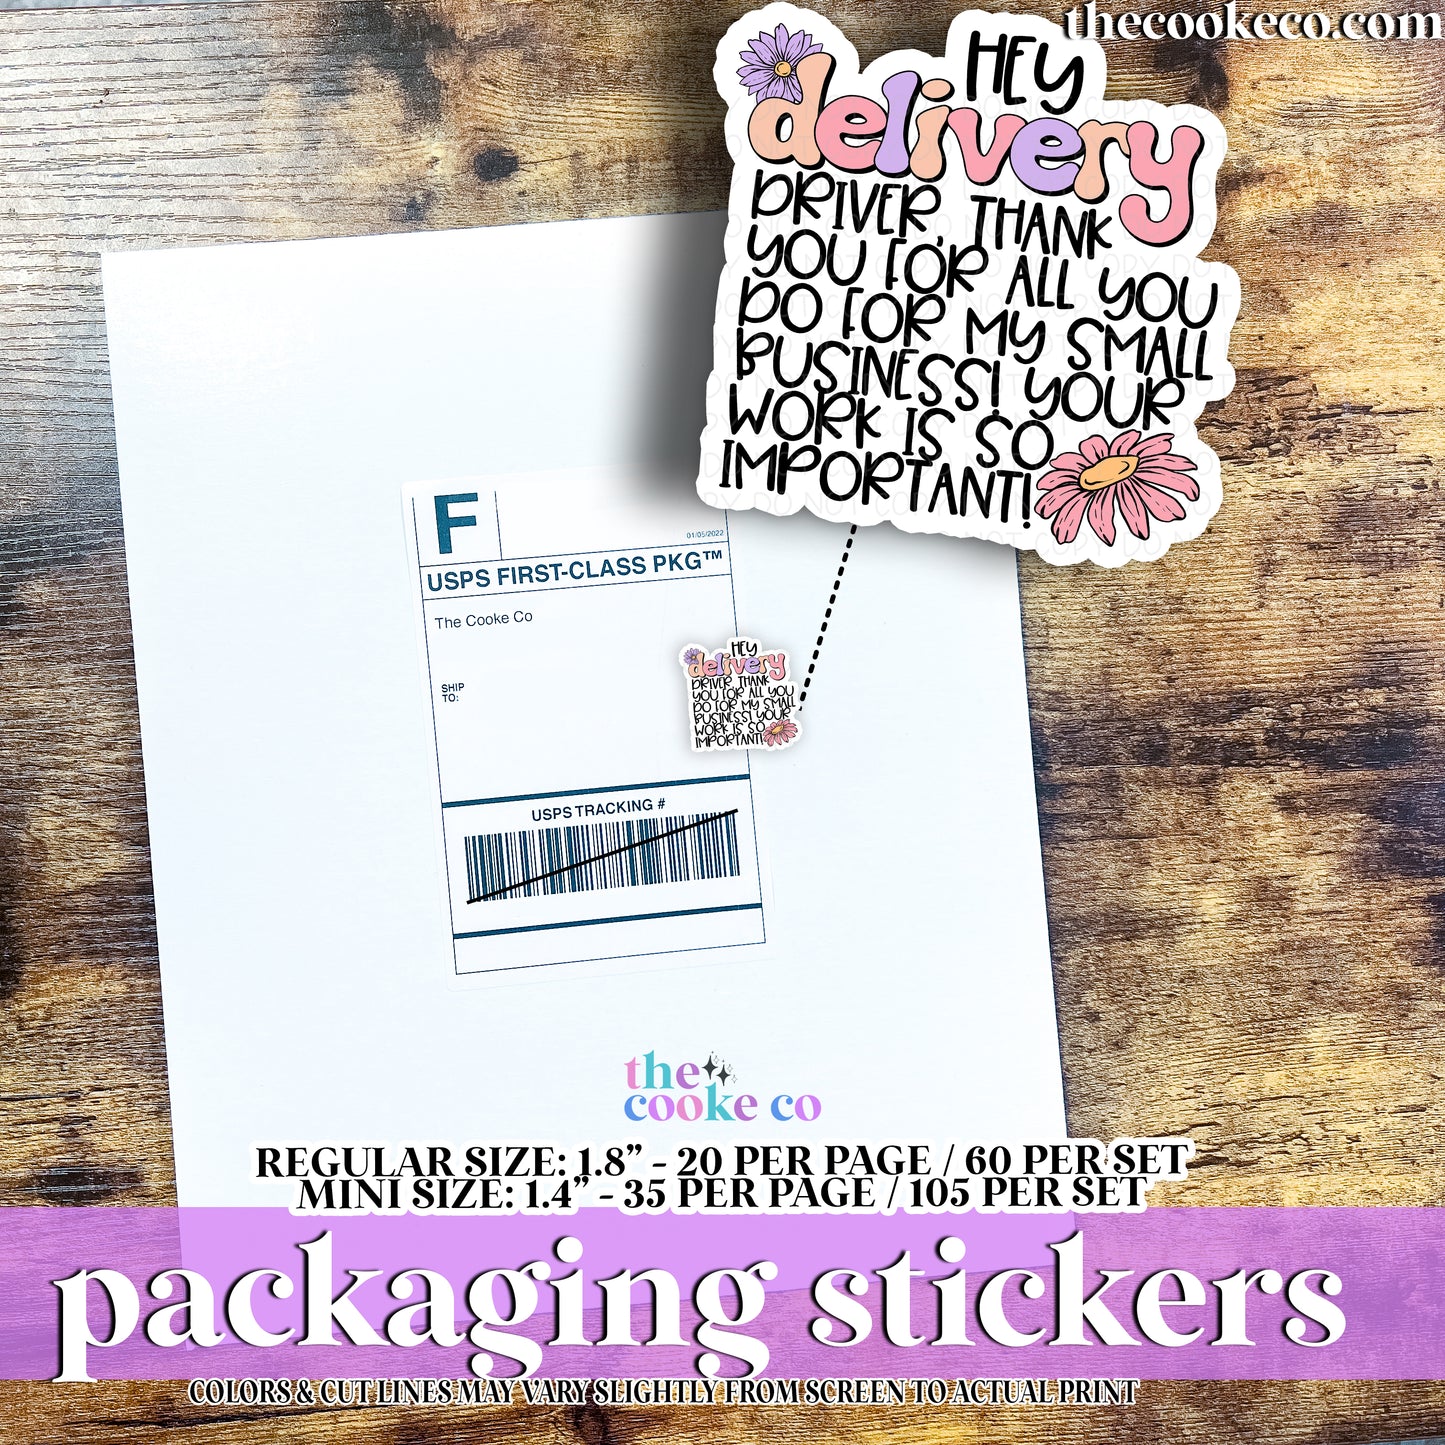 Packaging Stickers | #C0942 - HEY DELIVERY DRIVER